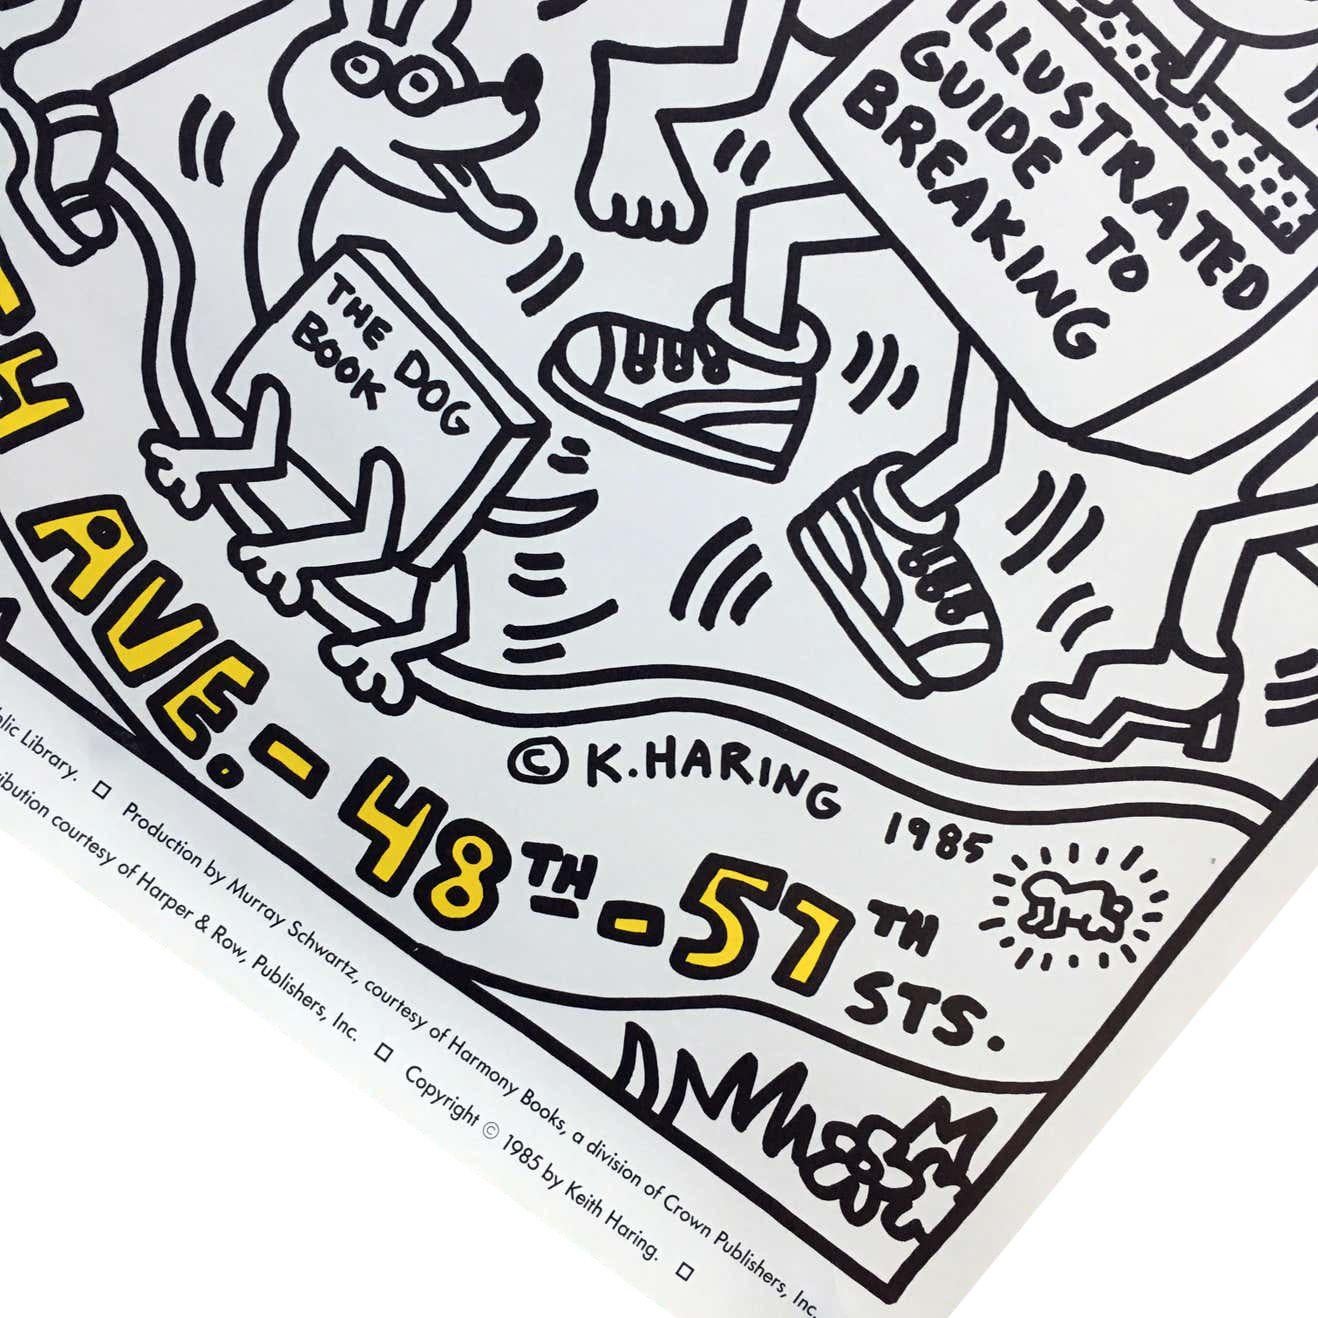 Keith Haring New York is Book Country (Keith Haring prints)  1